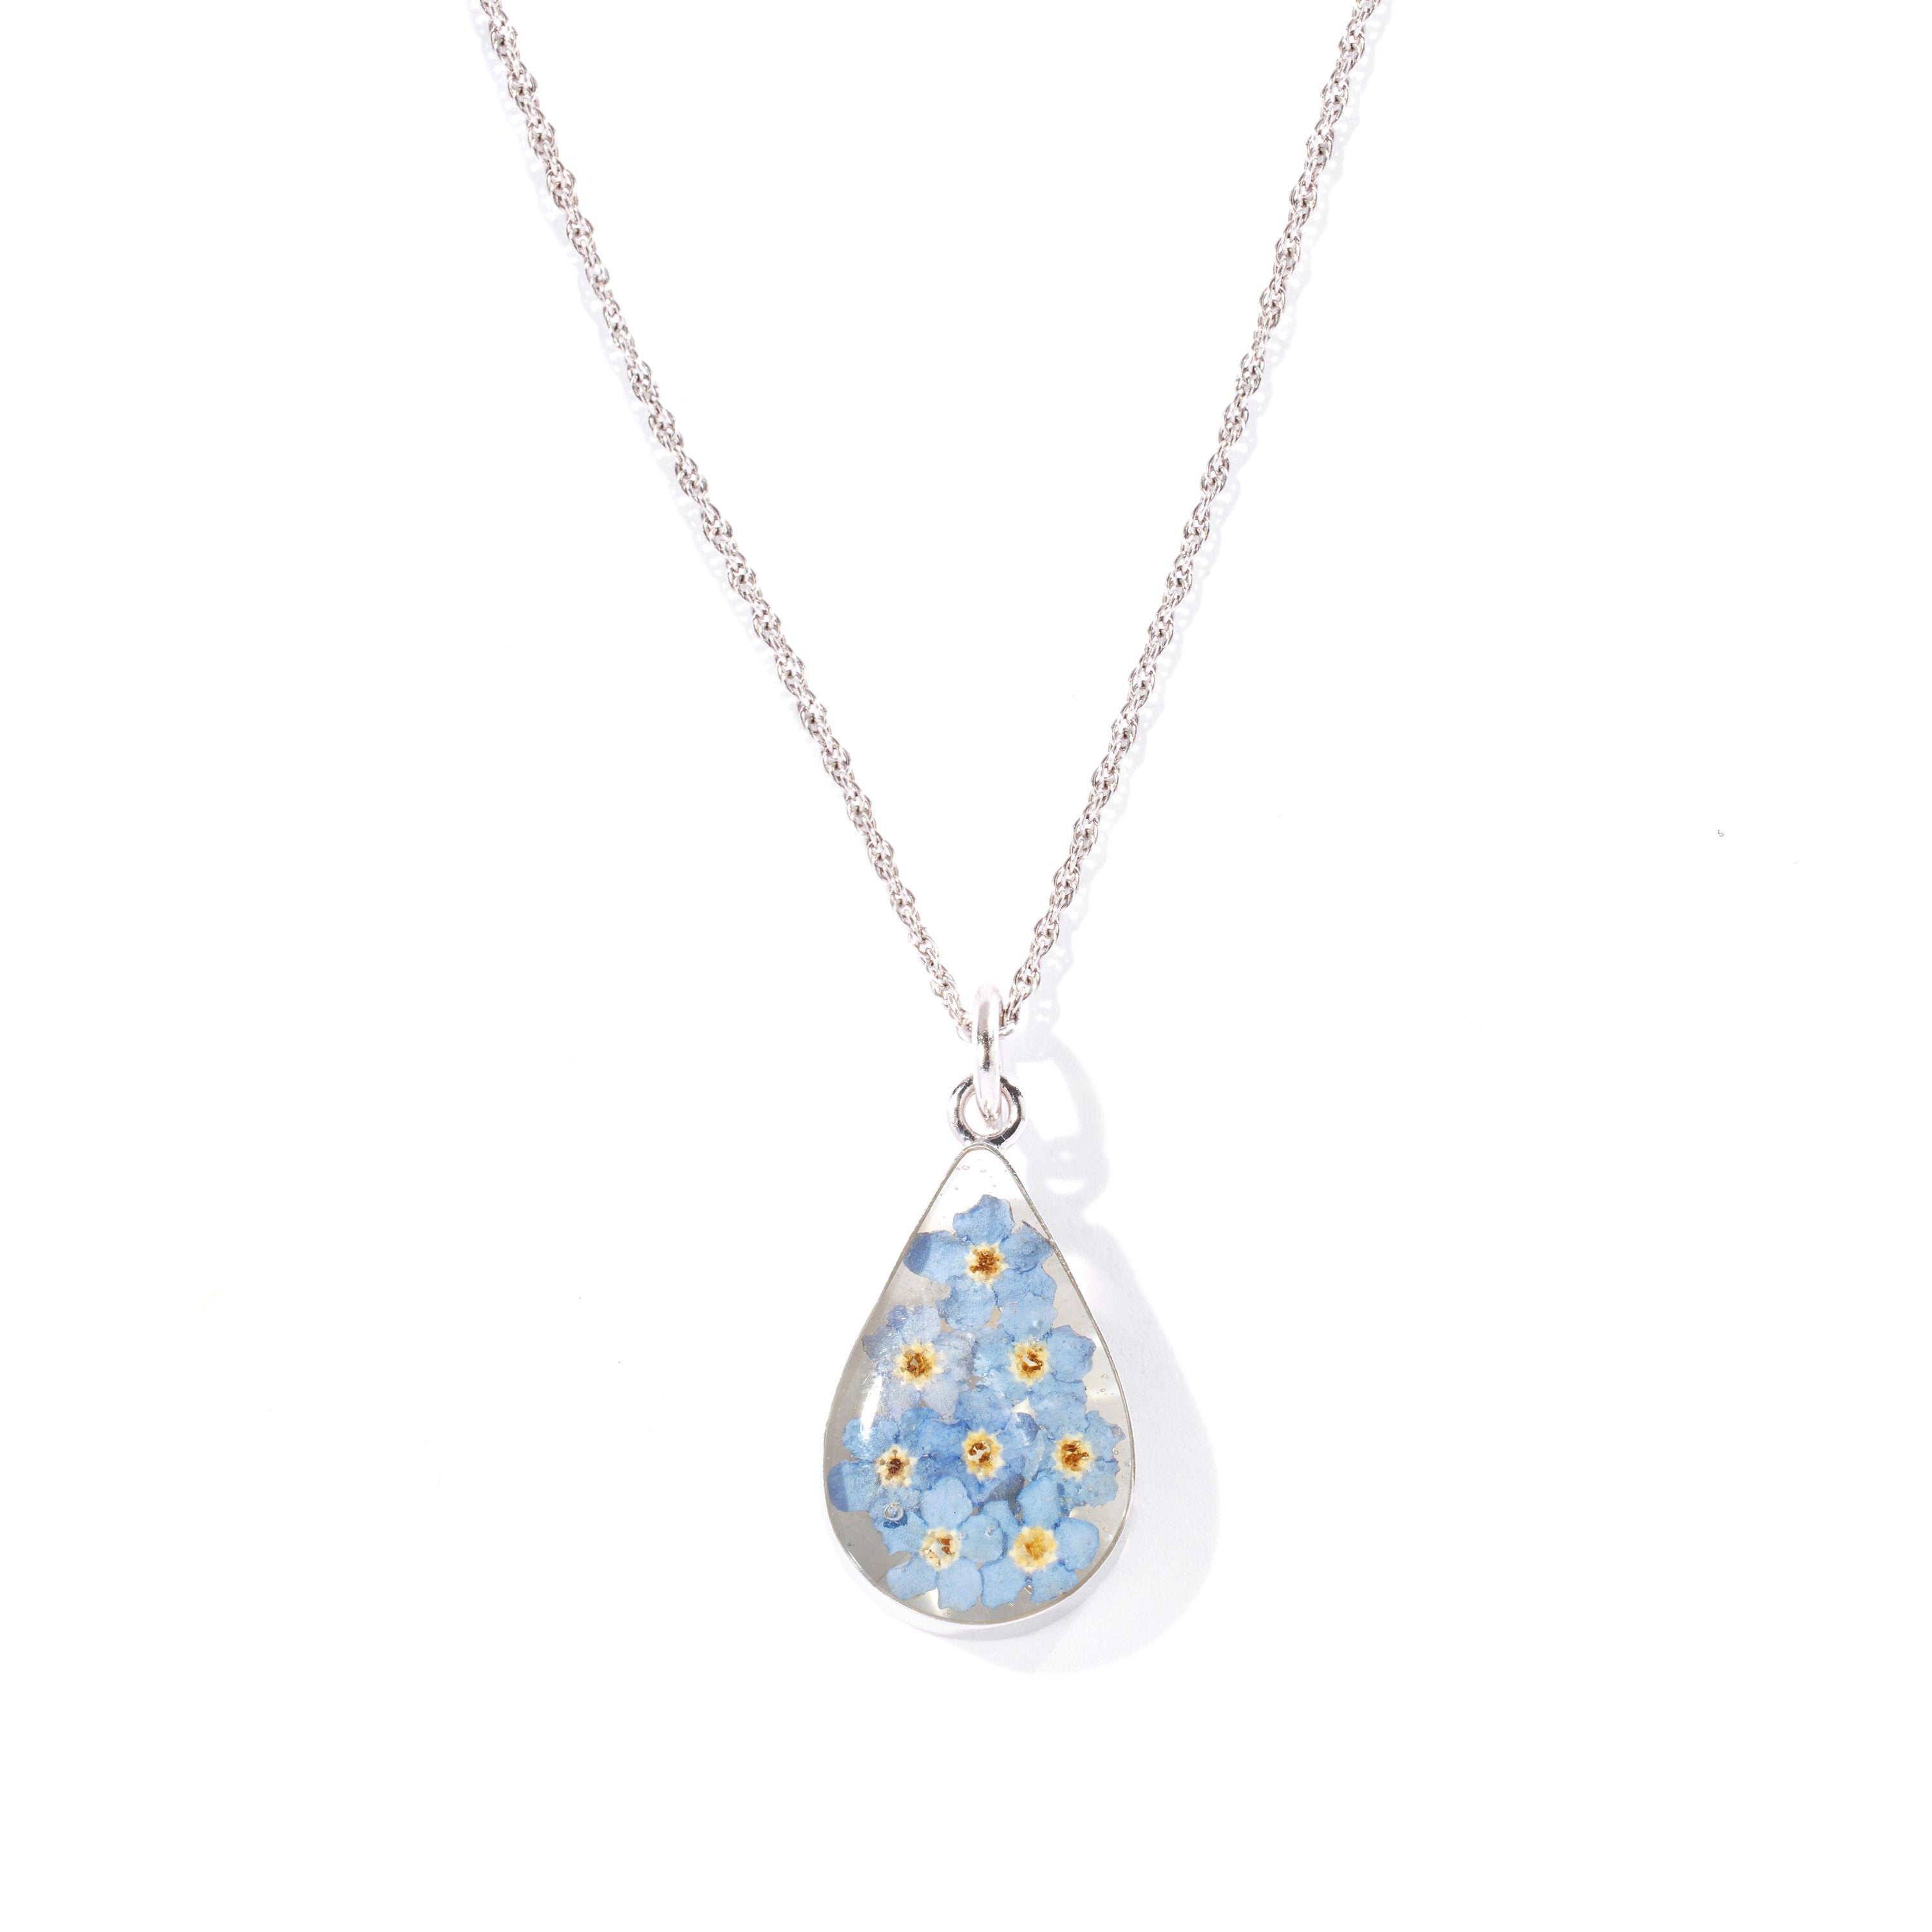 Eternal Bloom Teardrop Necklace with Forget-Me-Not Flowers